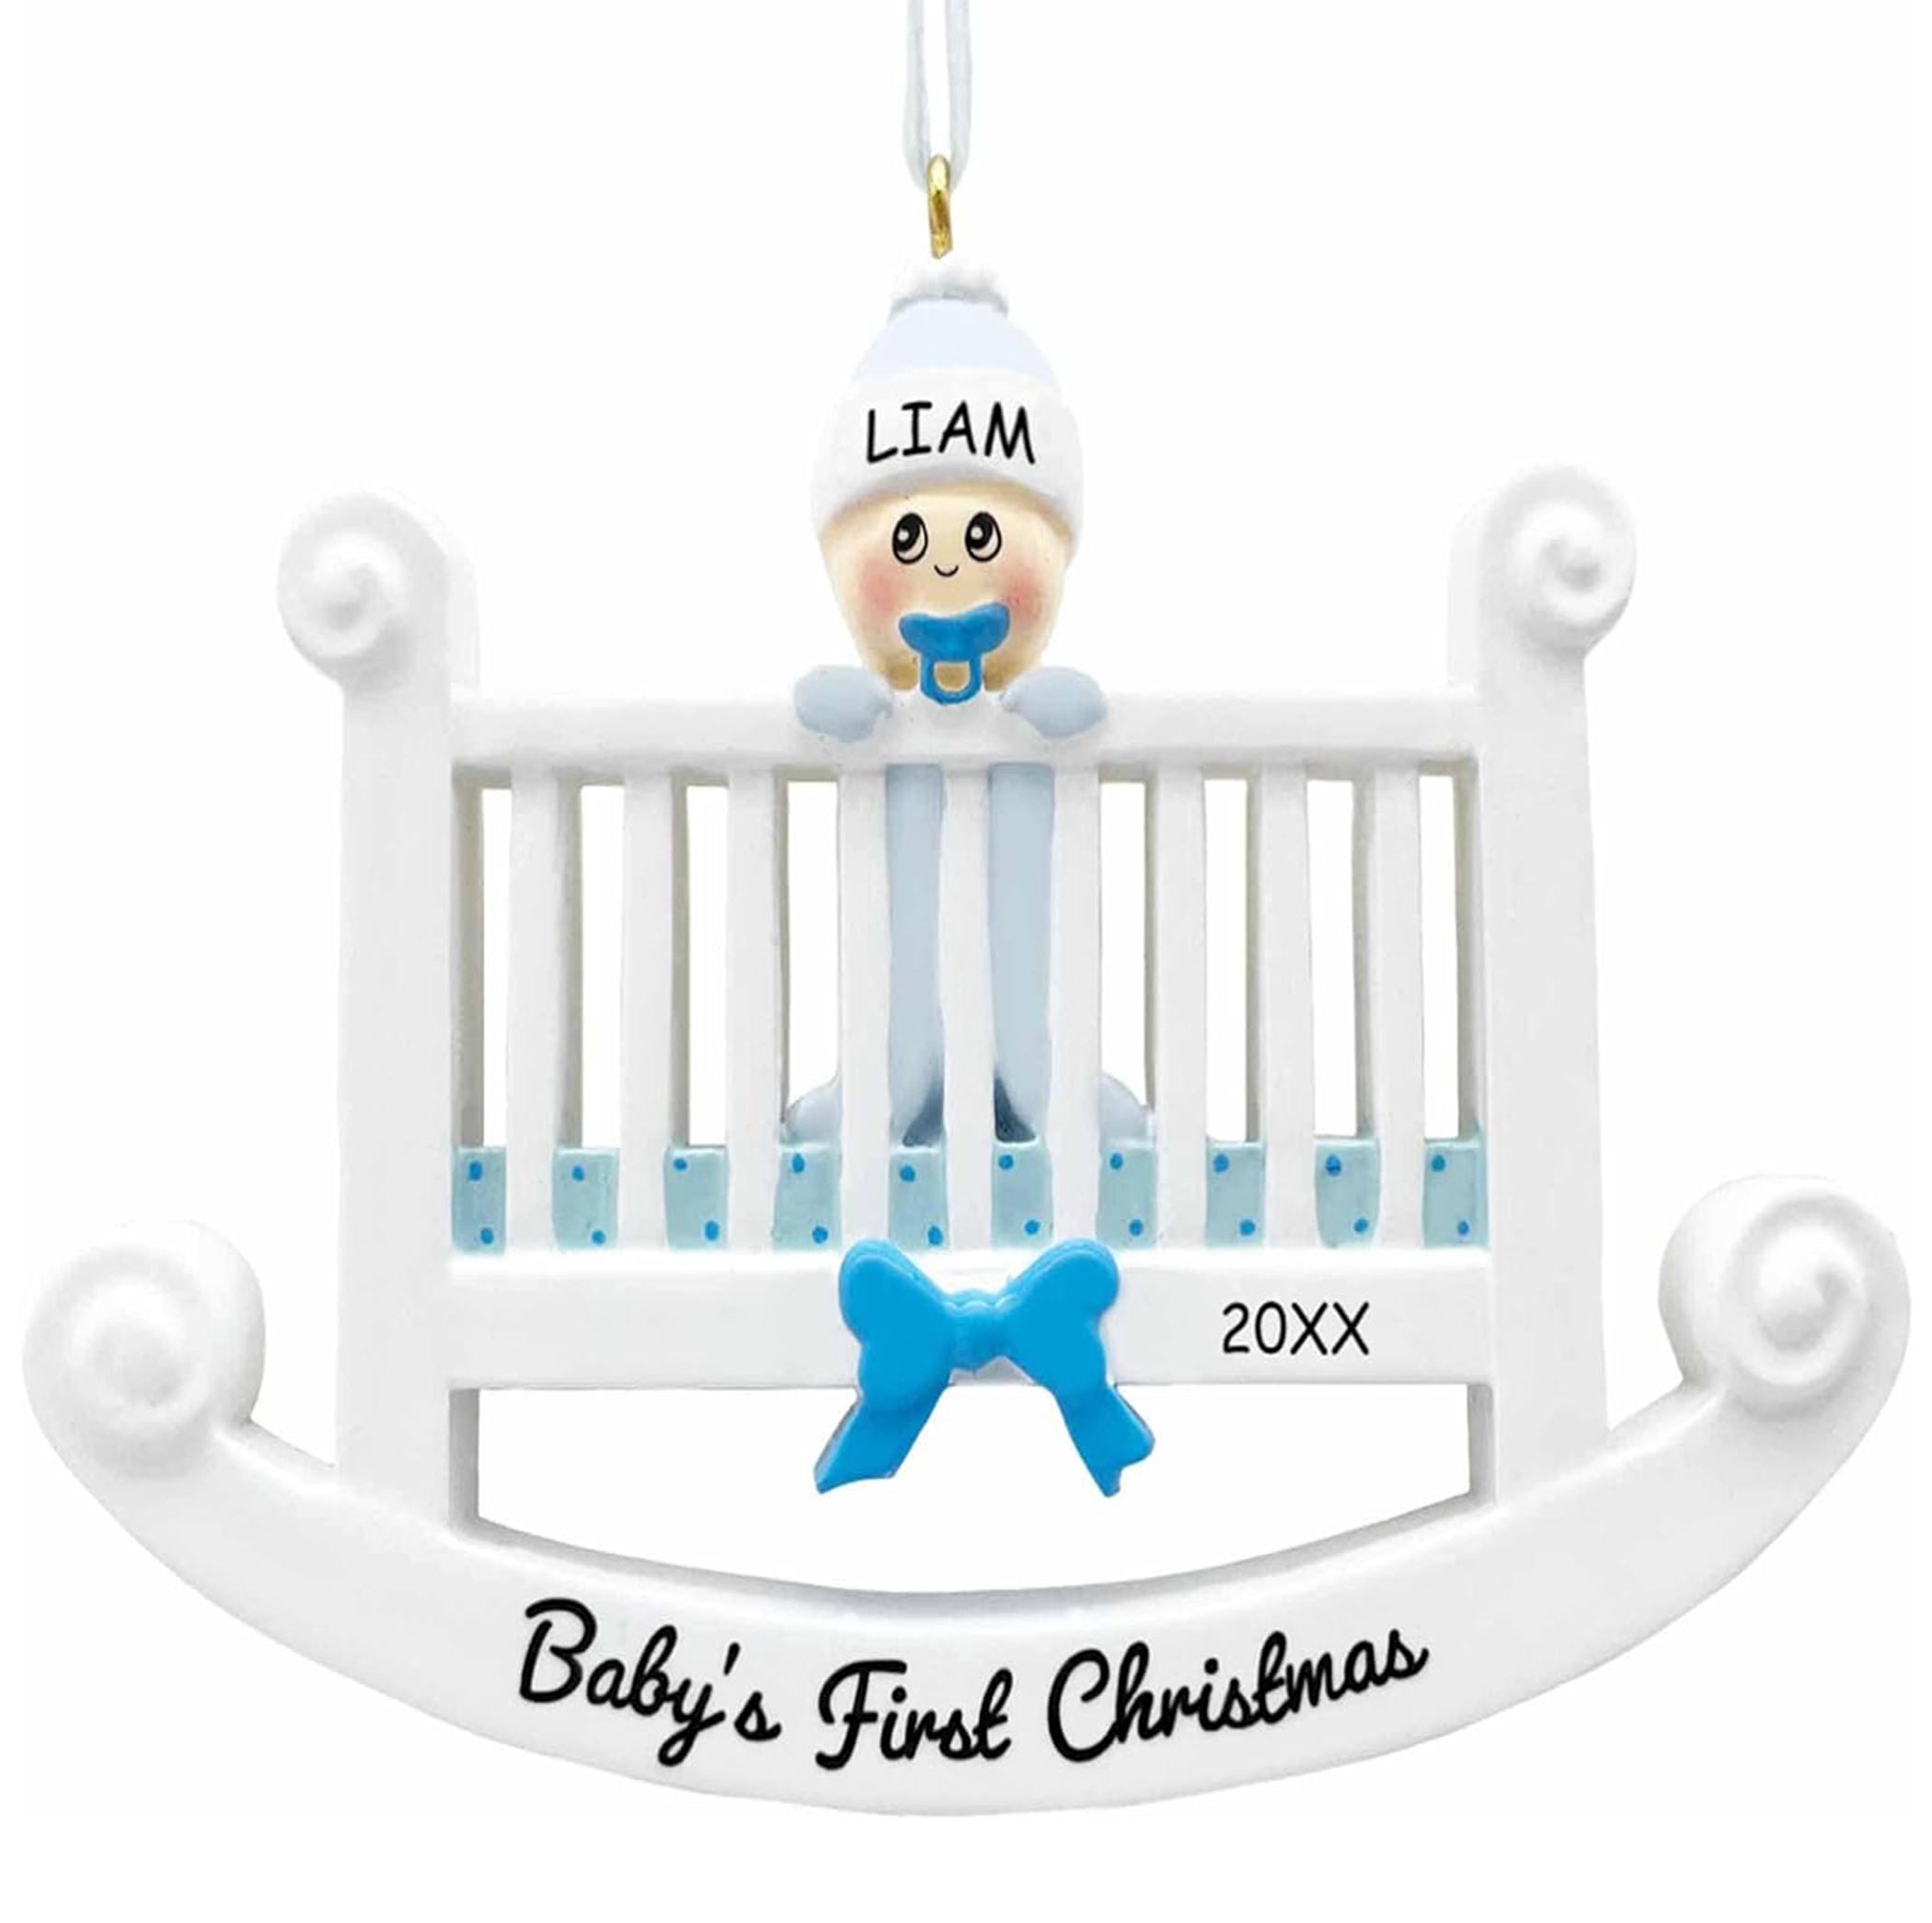 Personalized Dibsies Standing Baby in a Crib First Christmas Ornament - Blue